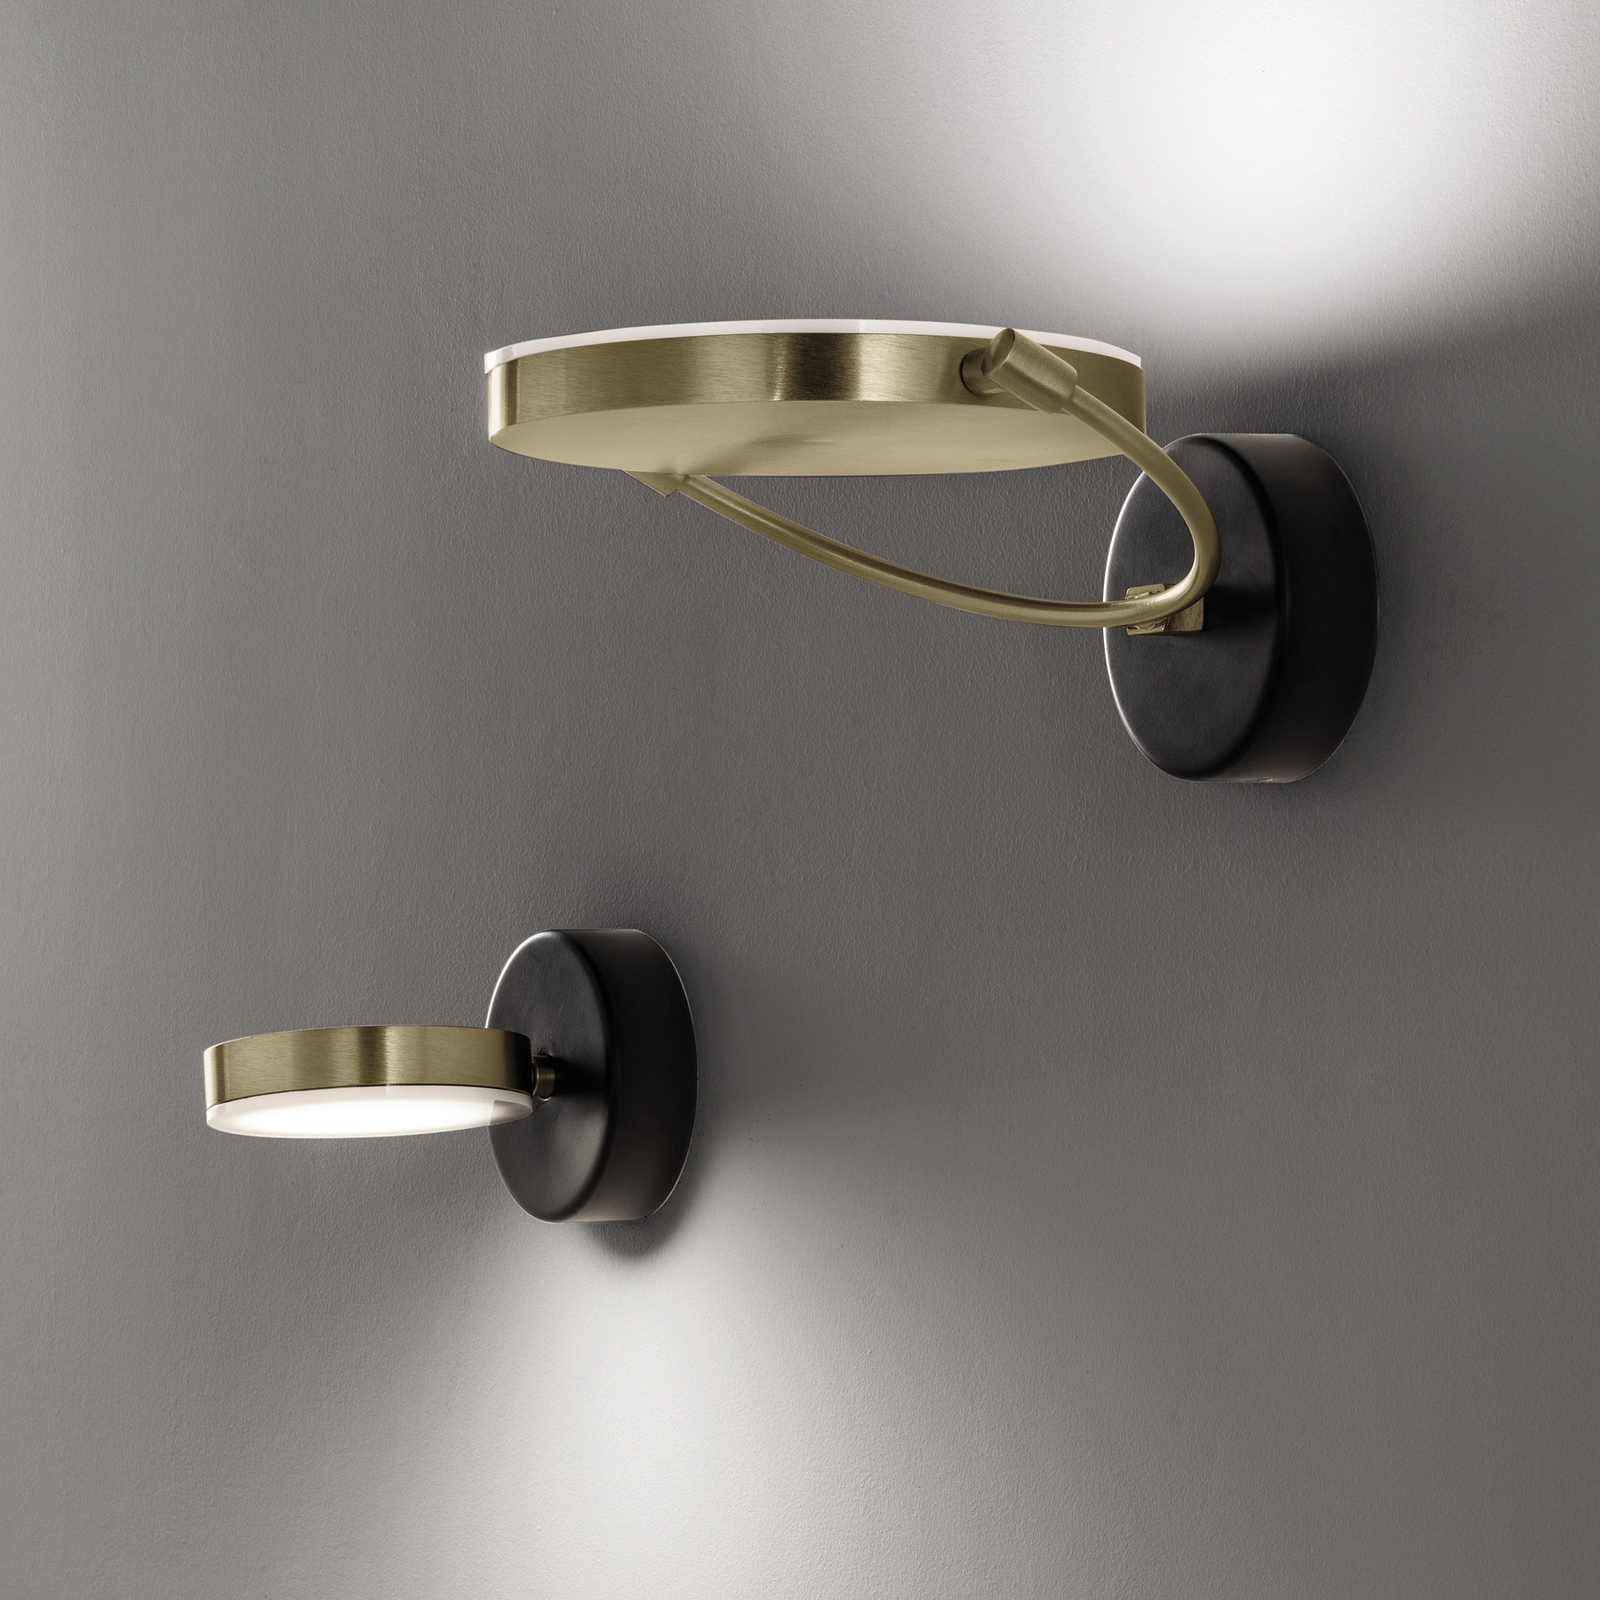 Giotto A LED wall spot pivotable and tiltable gold